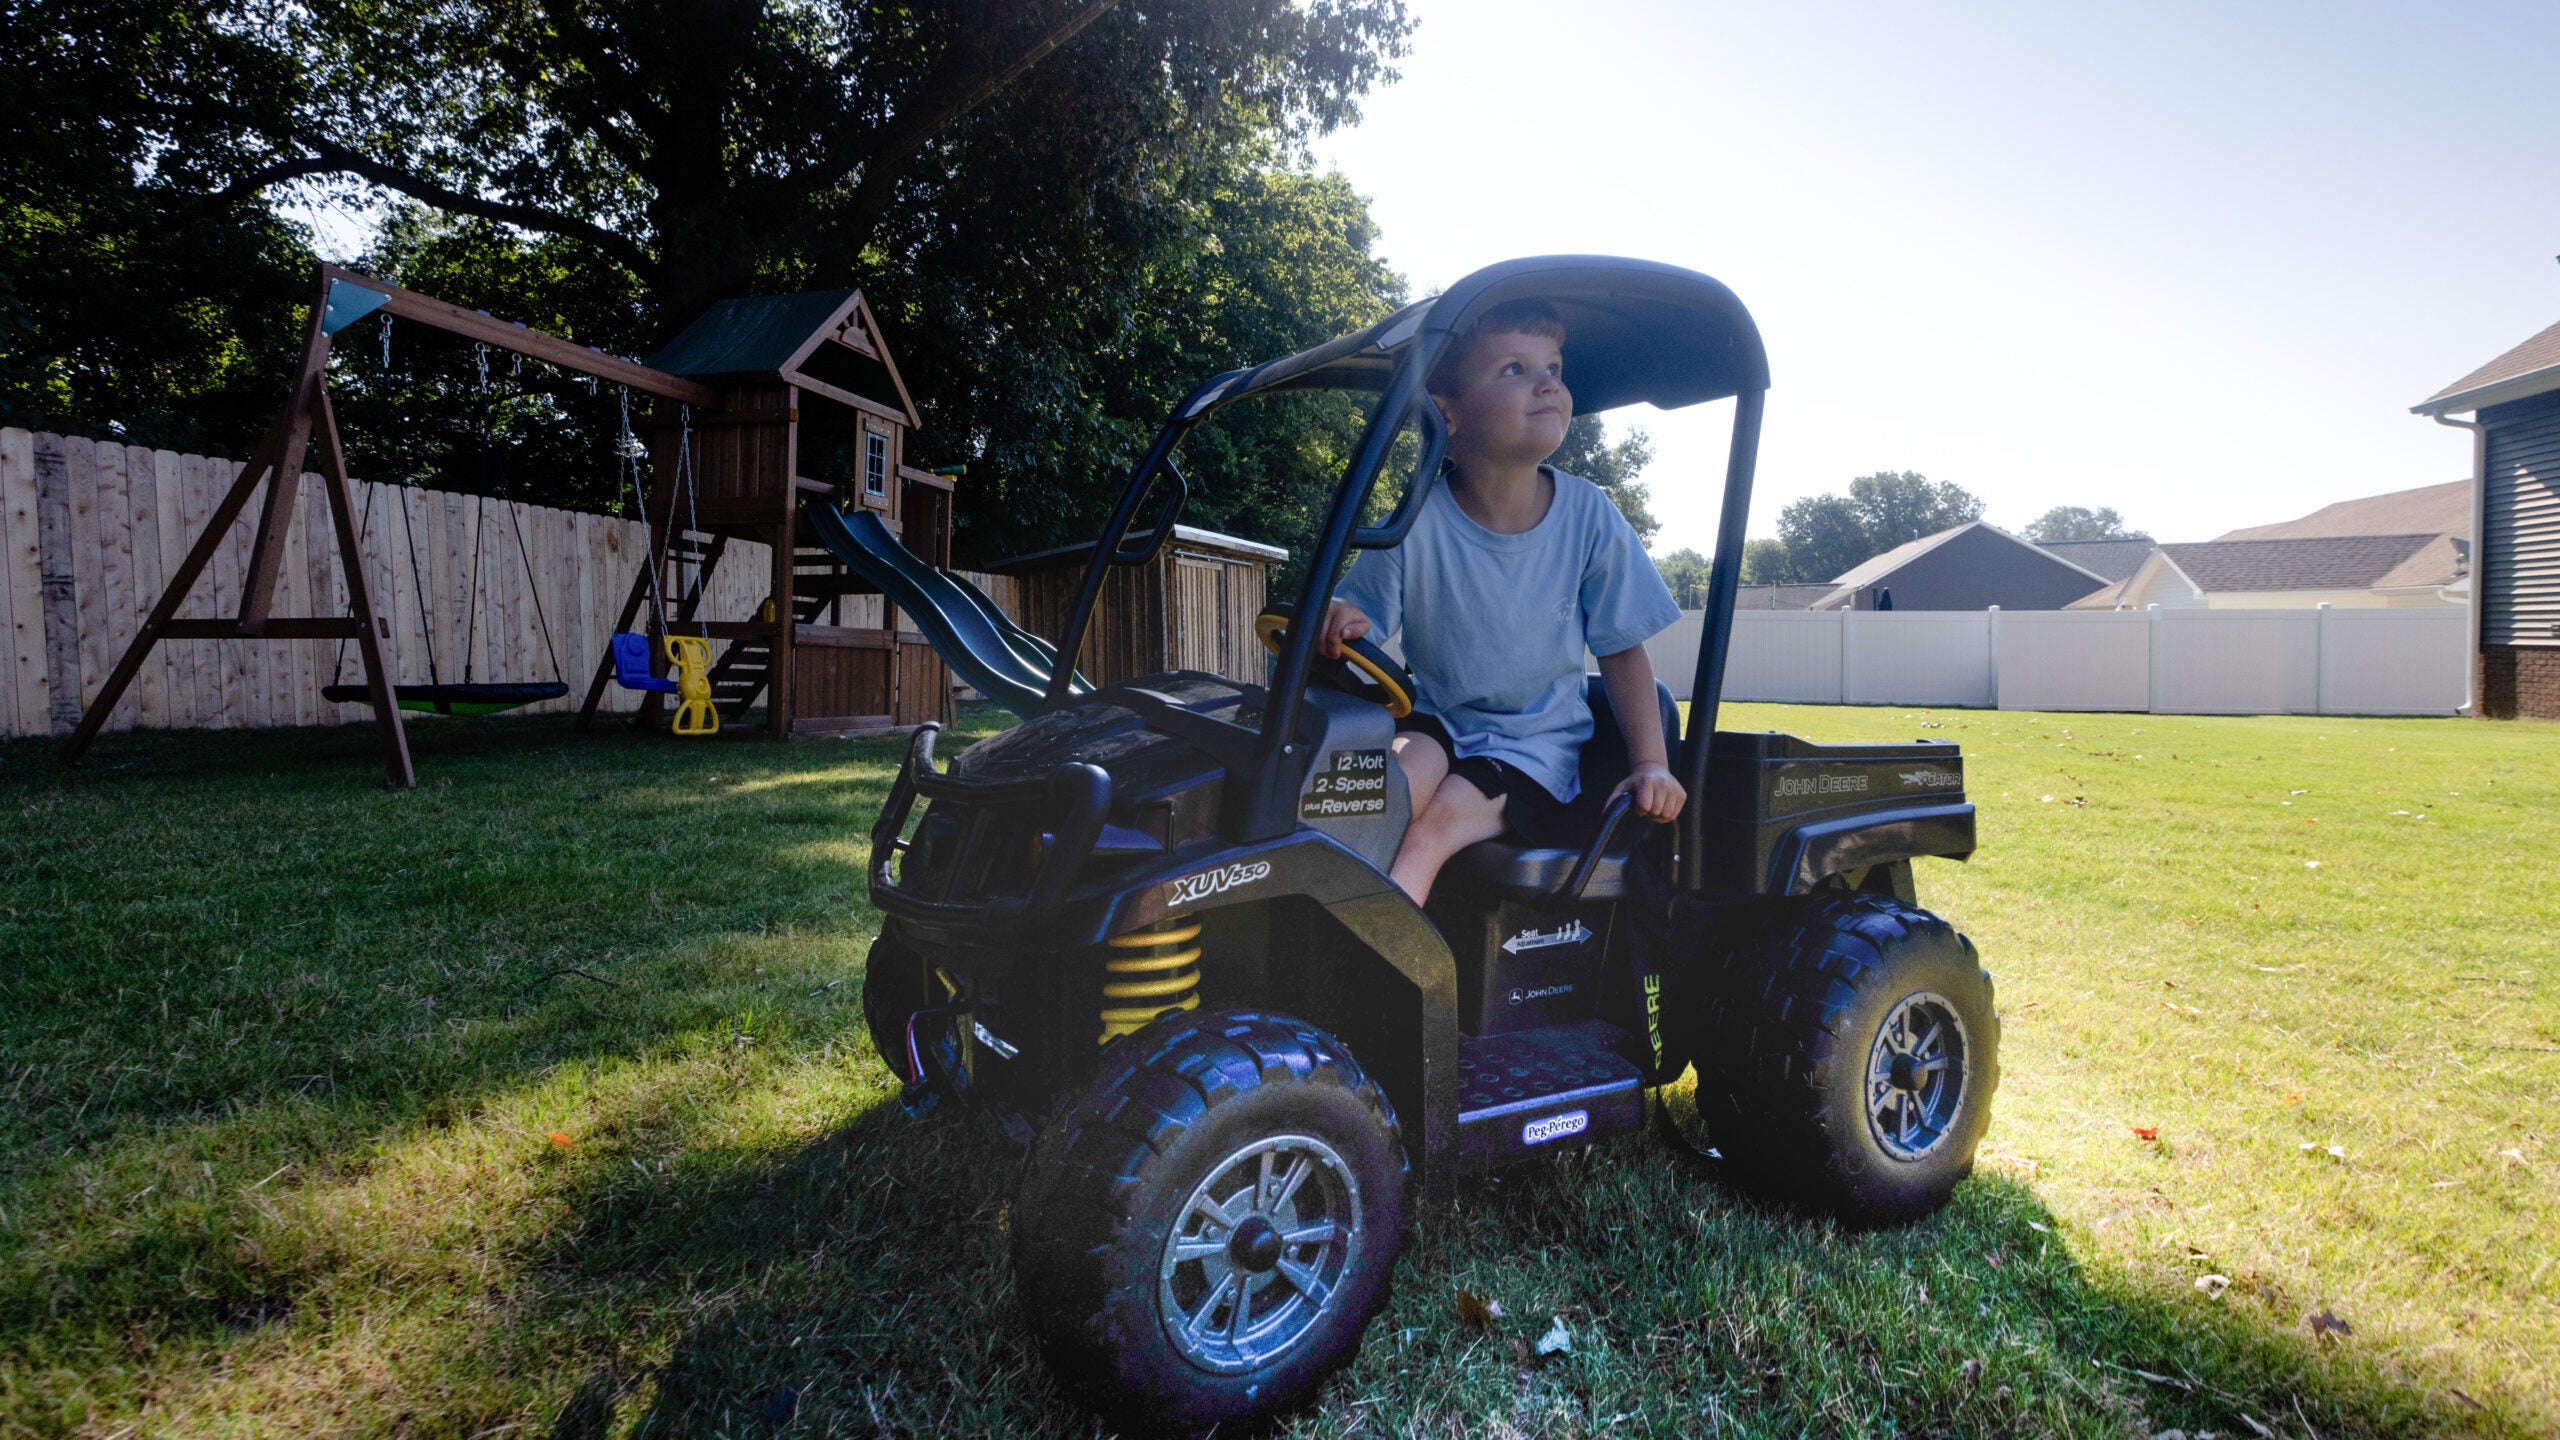 Colt looks up at the sky whilst riding a child-sized toy truck around his backyard. A jungle gym, and a verdant green lawn lie in the background.